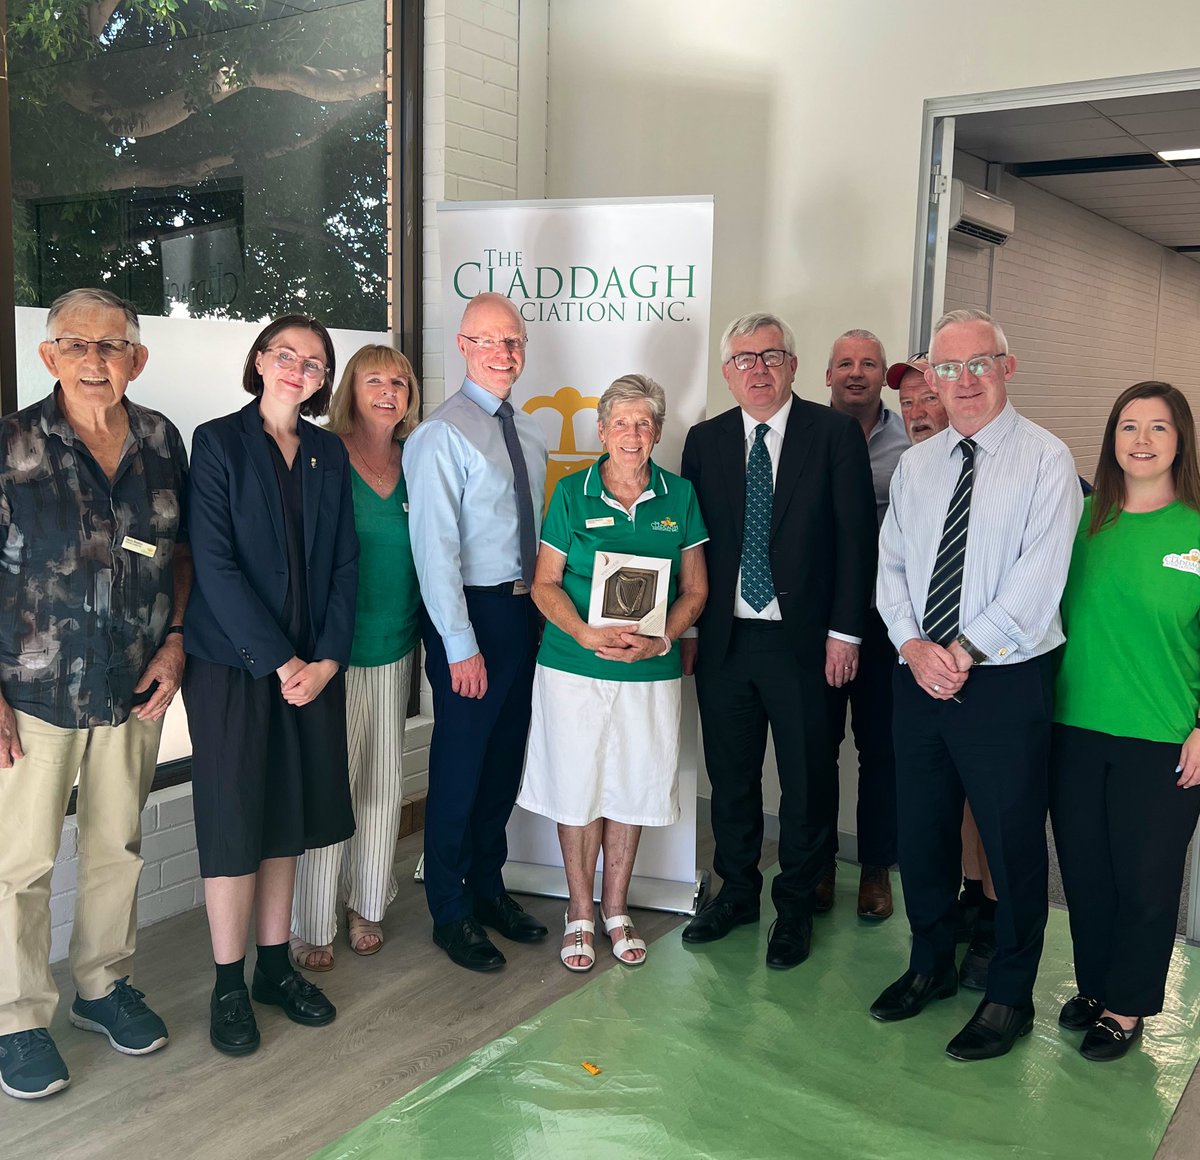 An absolute pleasure as always to meet with @claddaghperth & discuss their vital role in supporting our citizens in Western Australia. We were joined by @DonnellyStephen who was briefed on the work of the association - and presented a house warming gift for the new premises! 🥰